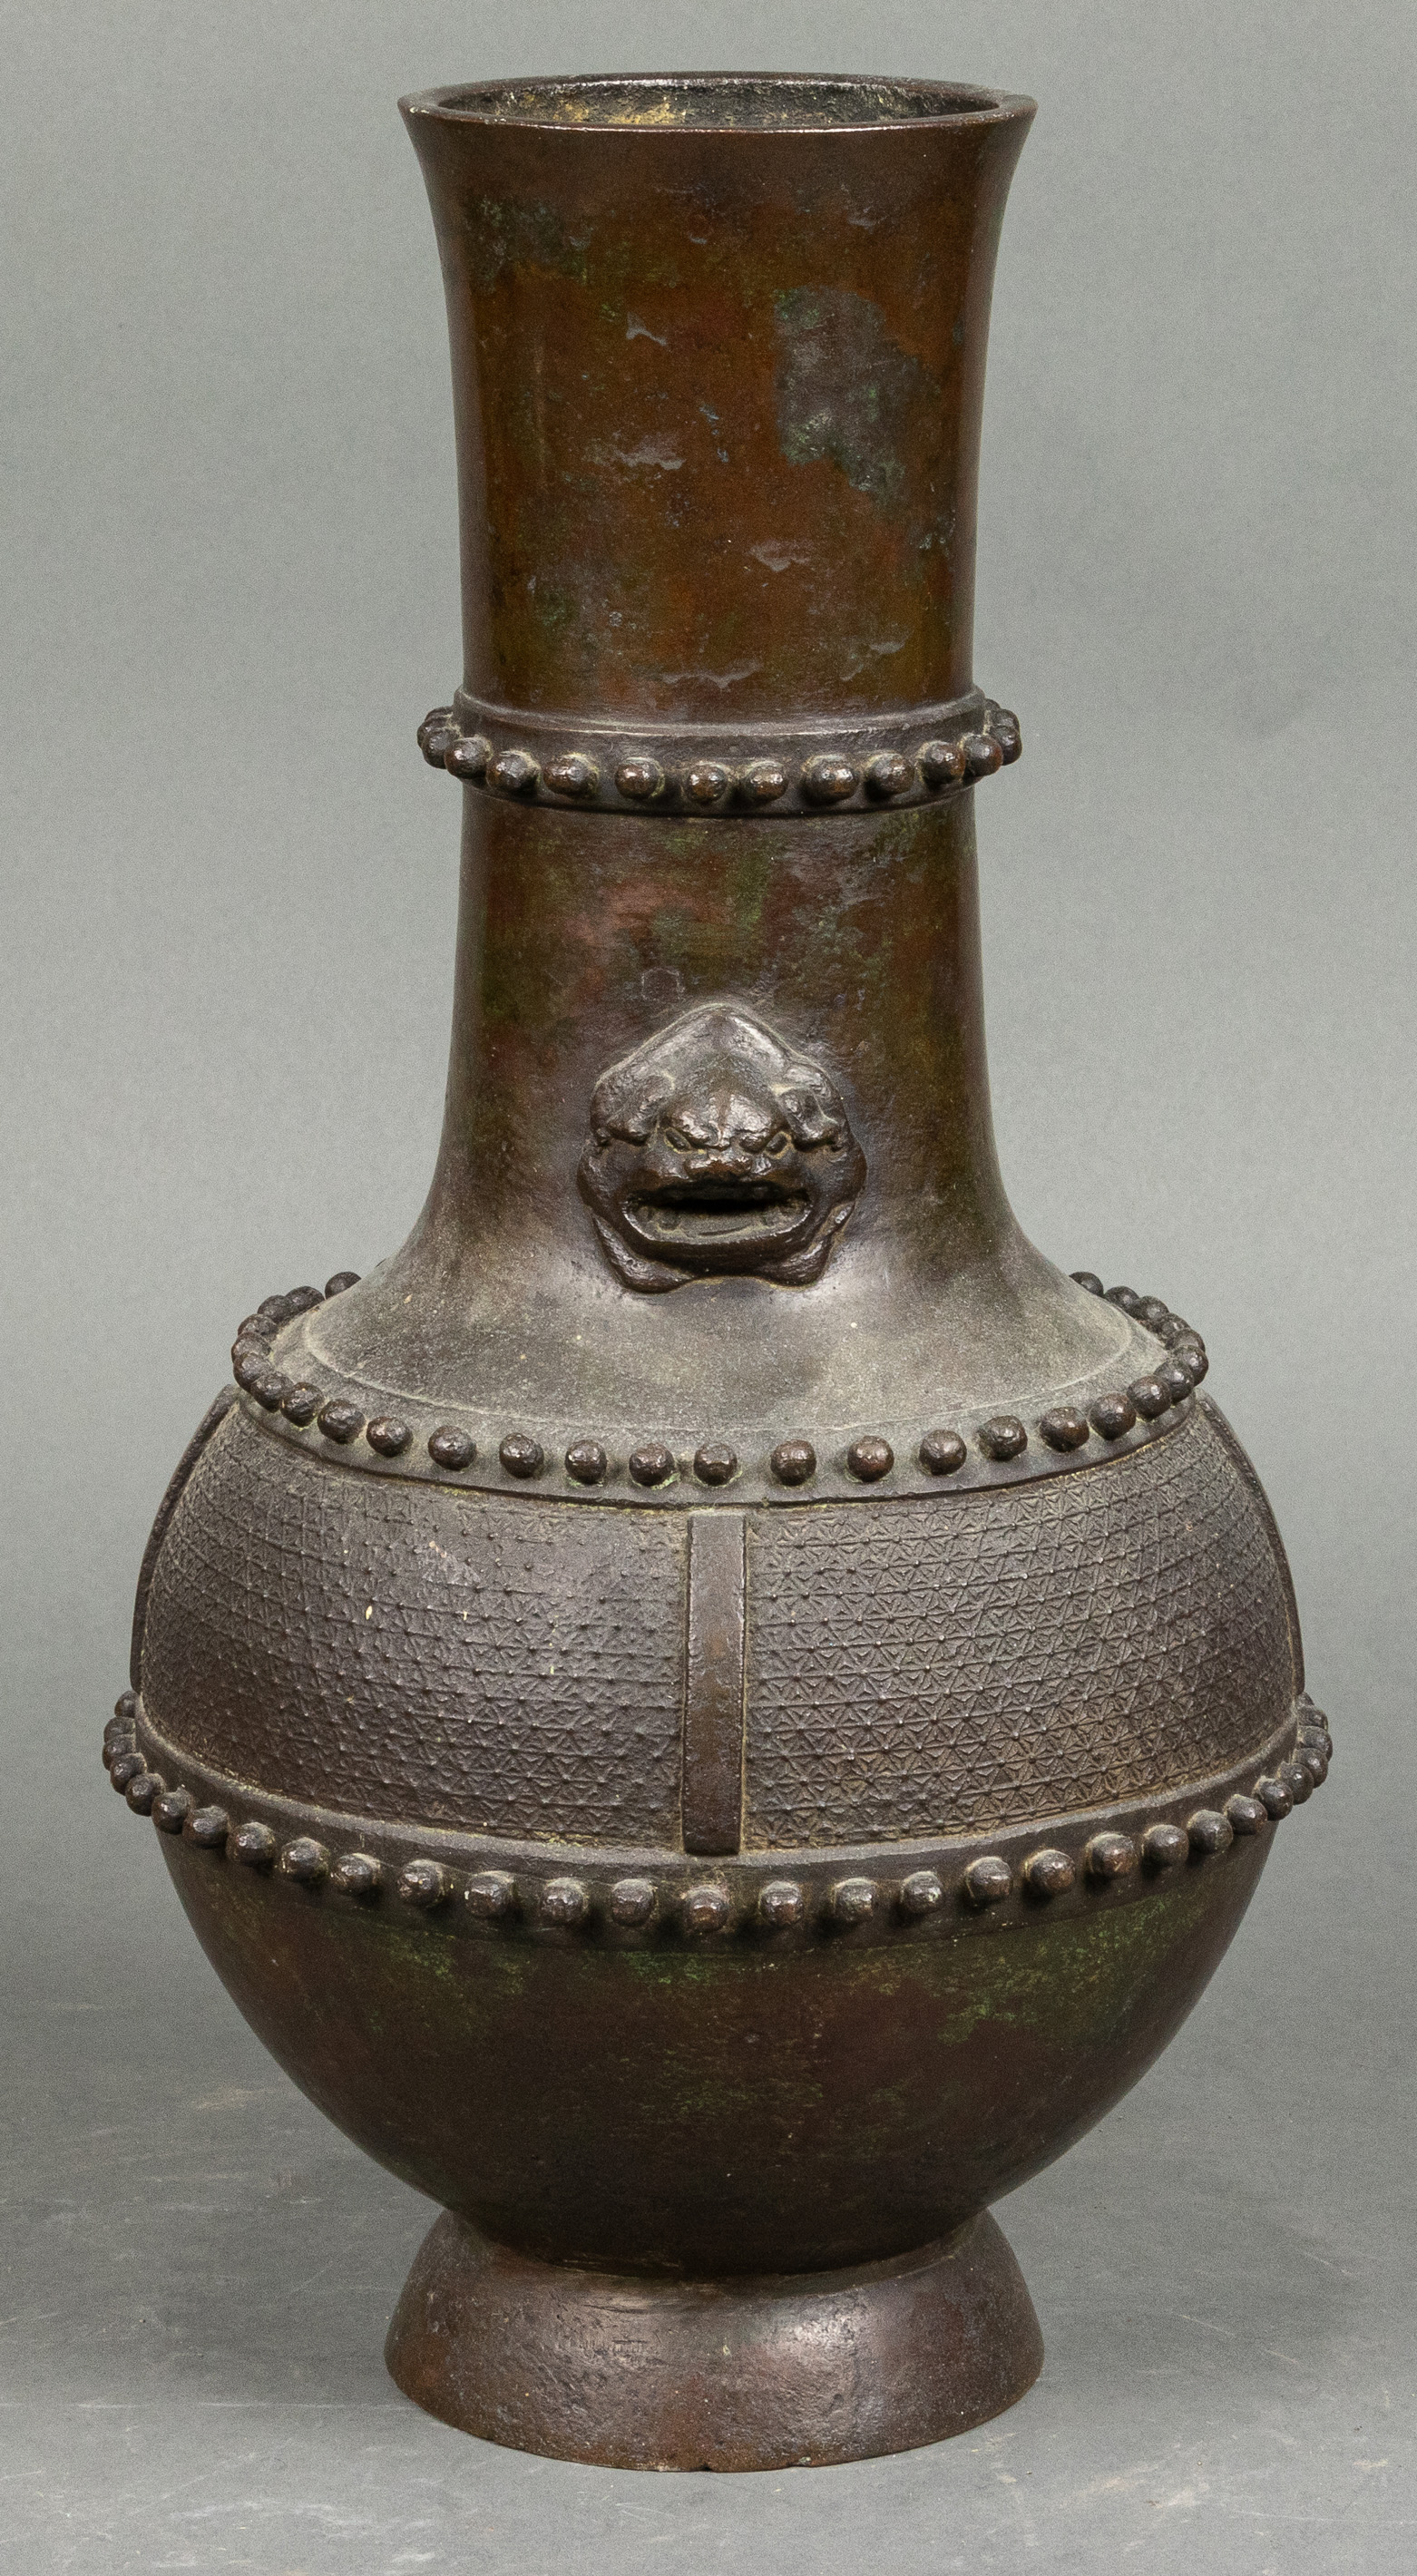 CHINESE ARCHAISTIC BRONZE VASE 3a47f3